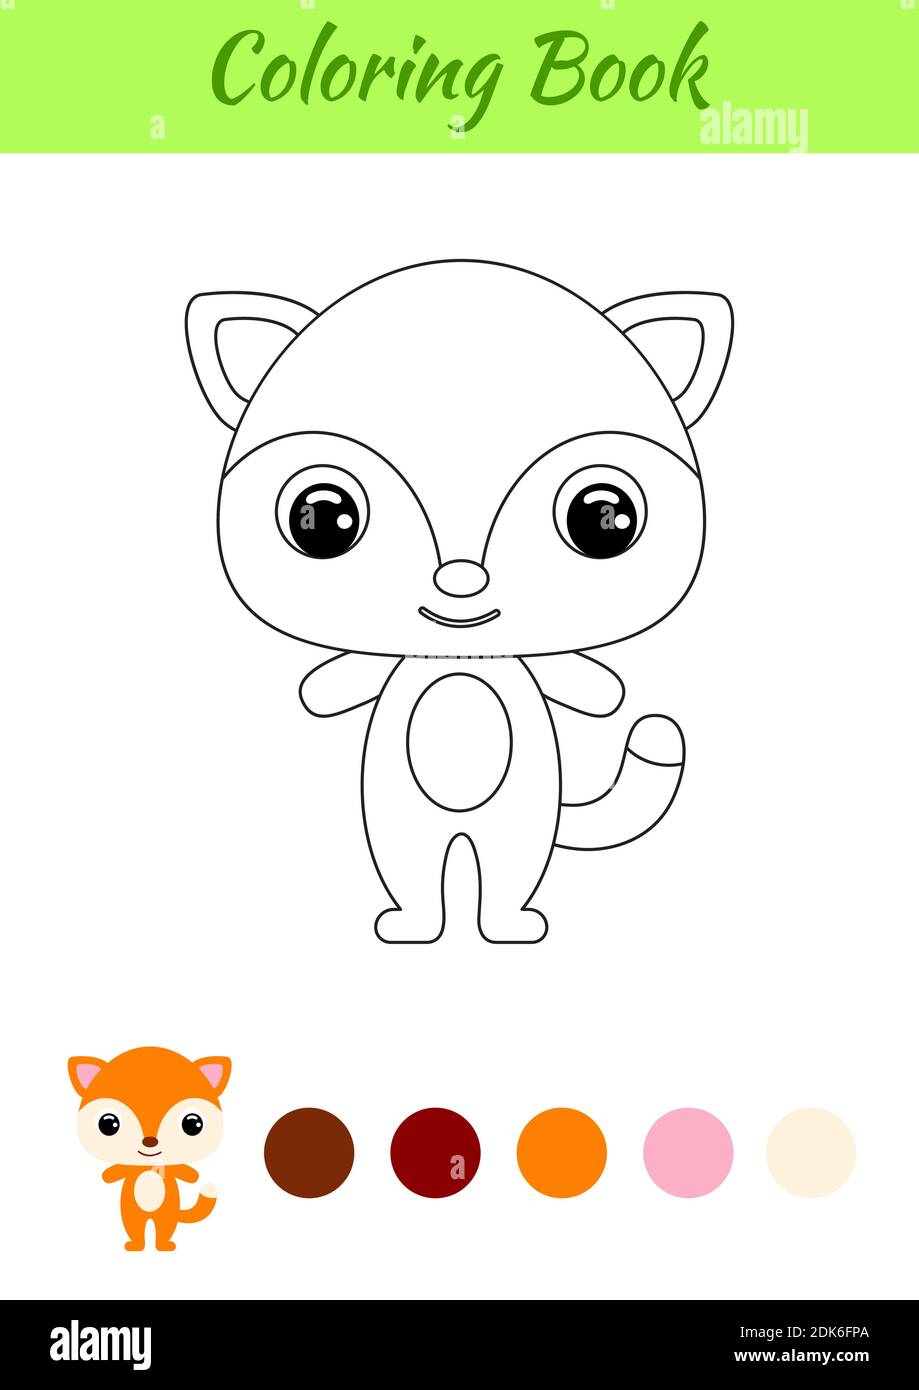 fox coloring pages